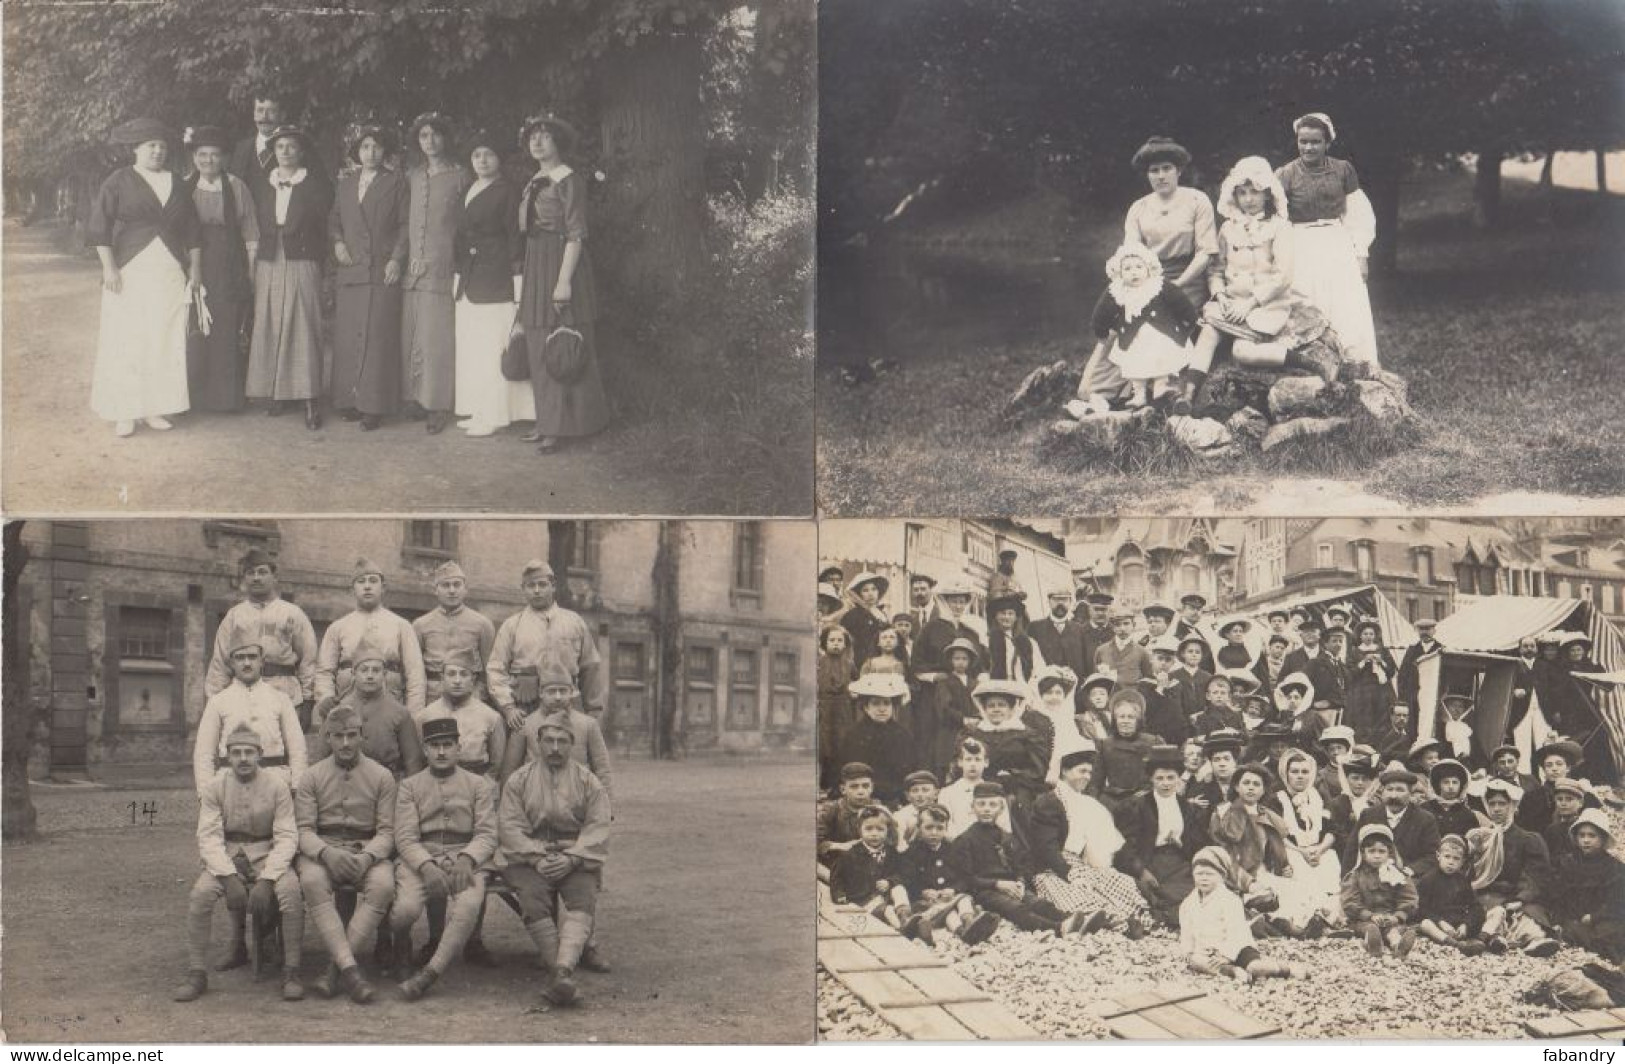 PEOPLE REAL PHOTO incl. MILITARY 500 Vintage Postcards mostly pre-1940